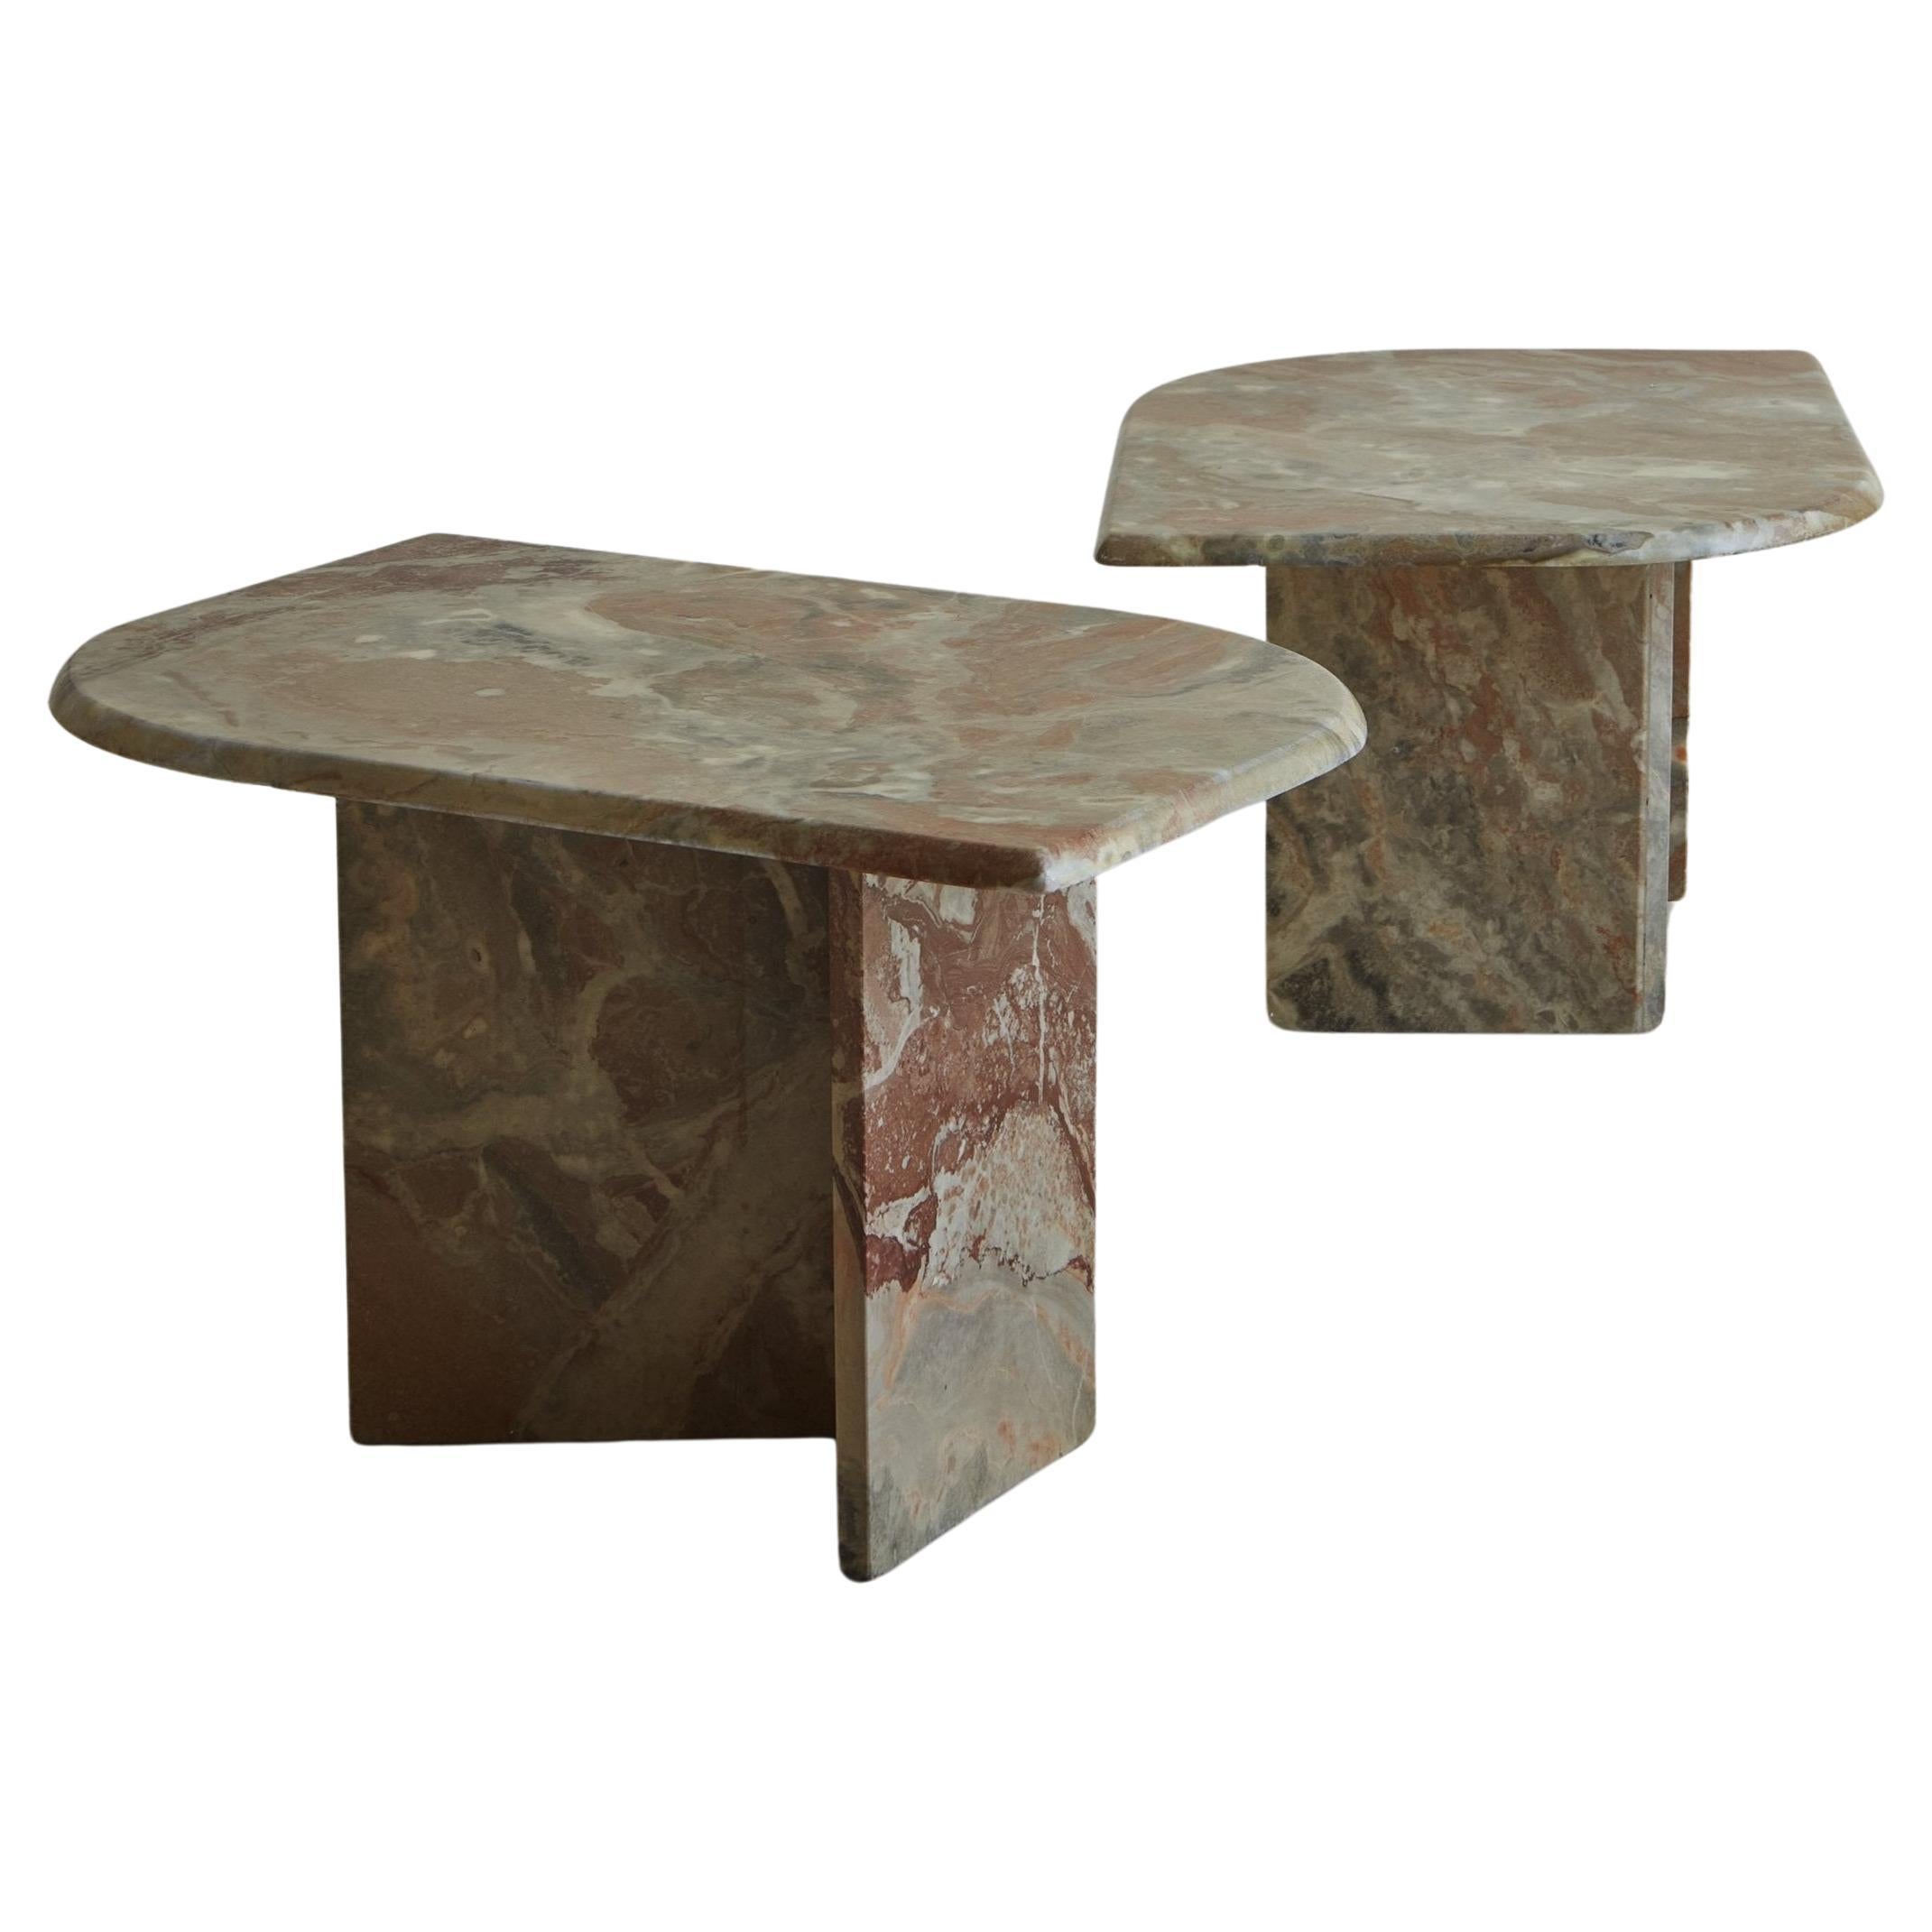 Pair of Marble Teardrop Nesting Tables, France 20th Century